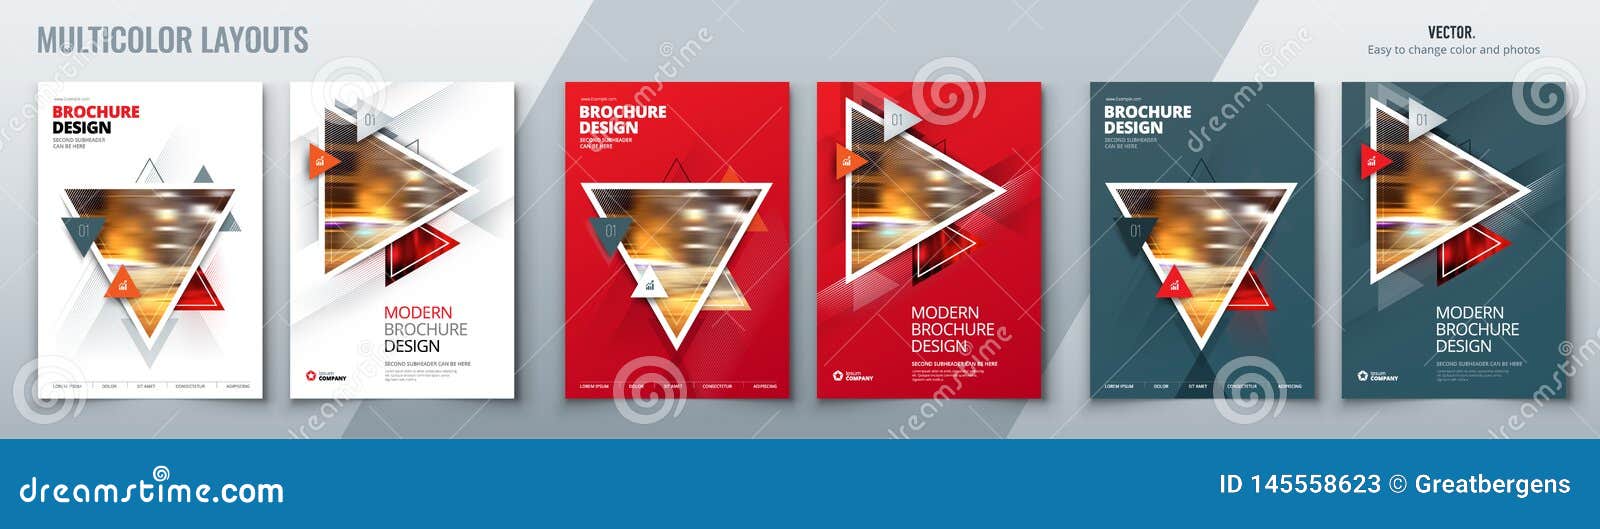 Download Brochure Template Layout Design With Triangles. Corporate Business Annual Report, Catalog ...